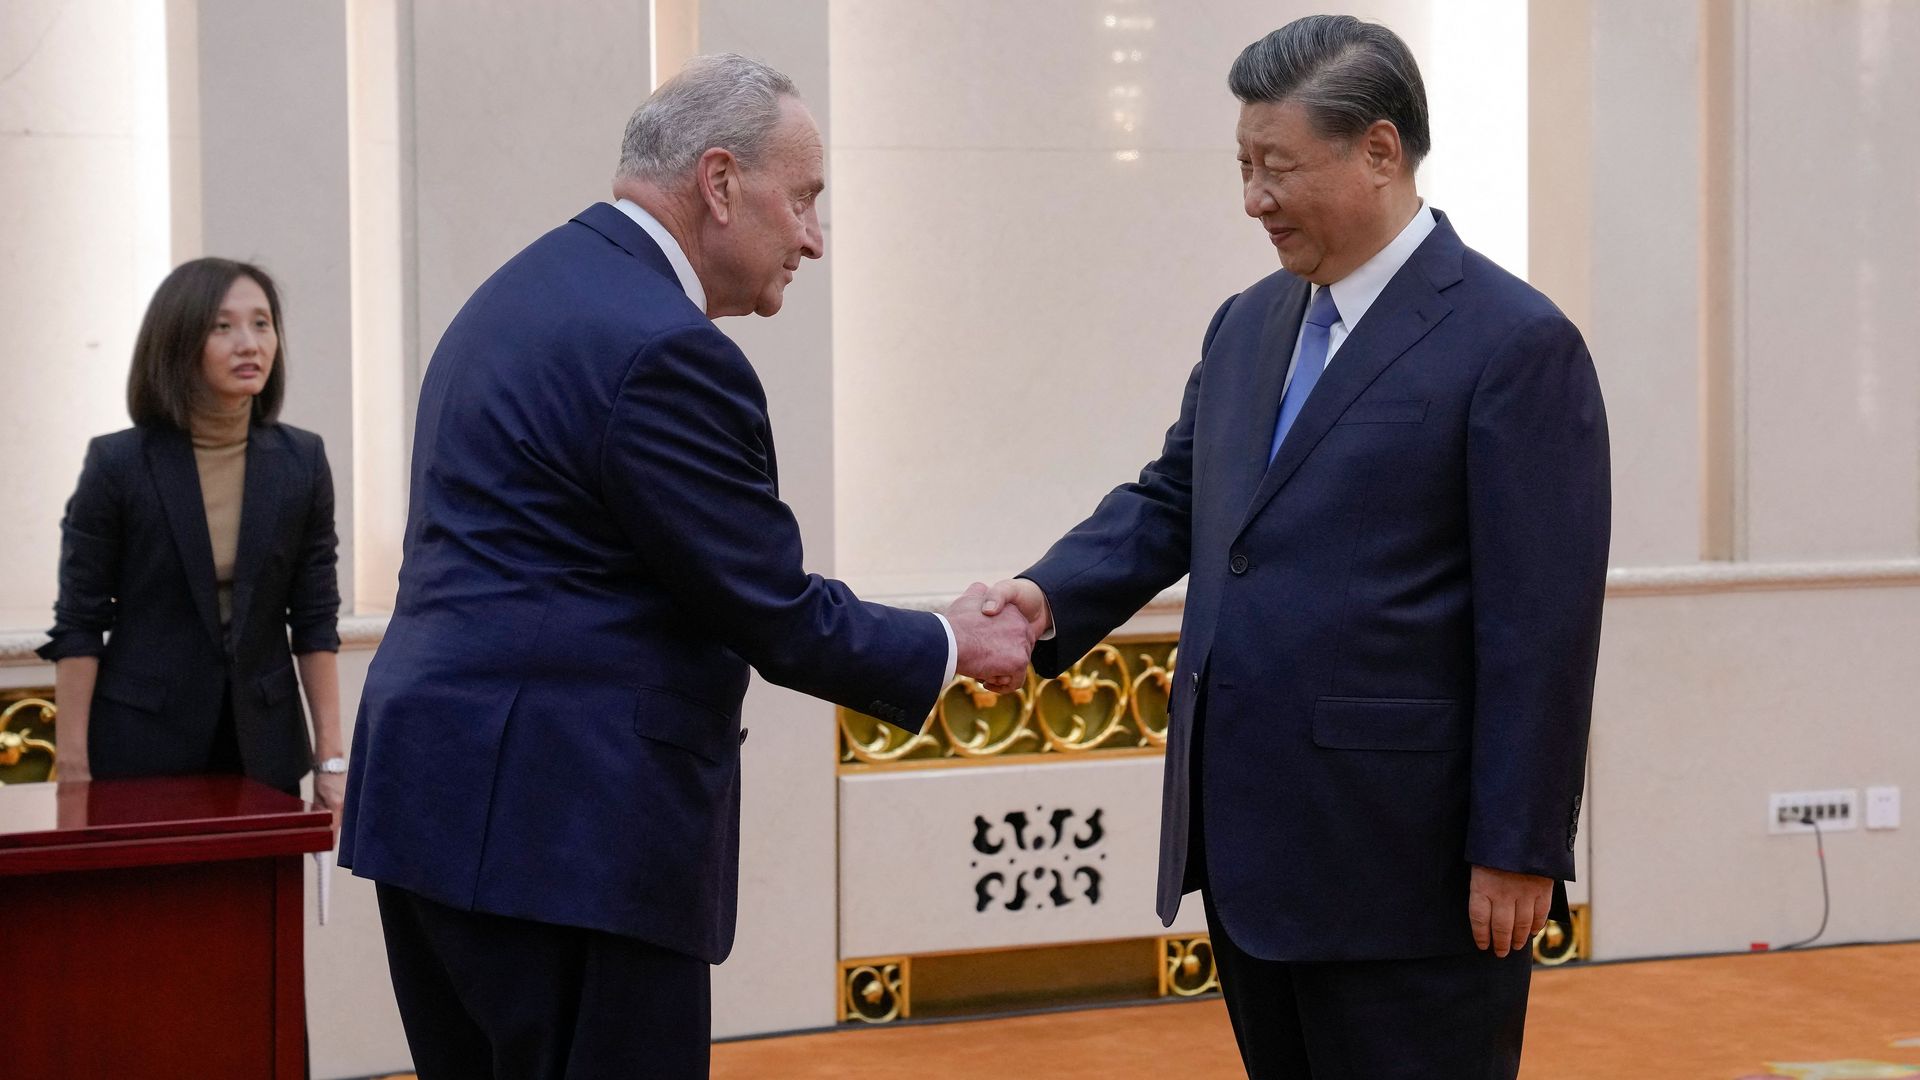 Senate Majority Leader Chuck Schumer (D-N.Y.) shaking hands with Chinese President Xi Jinping in Beijing on Oct. 9.